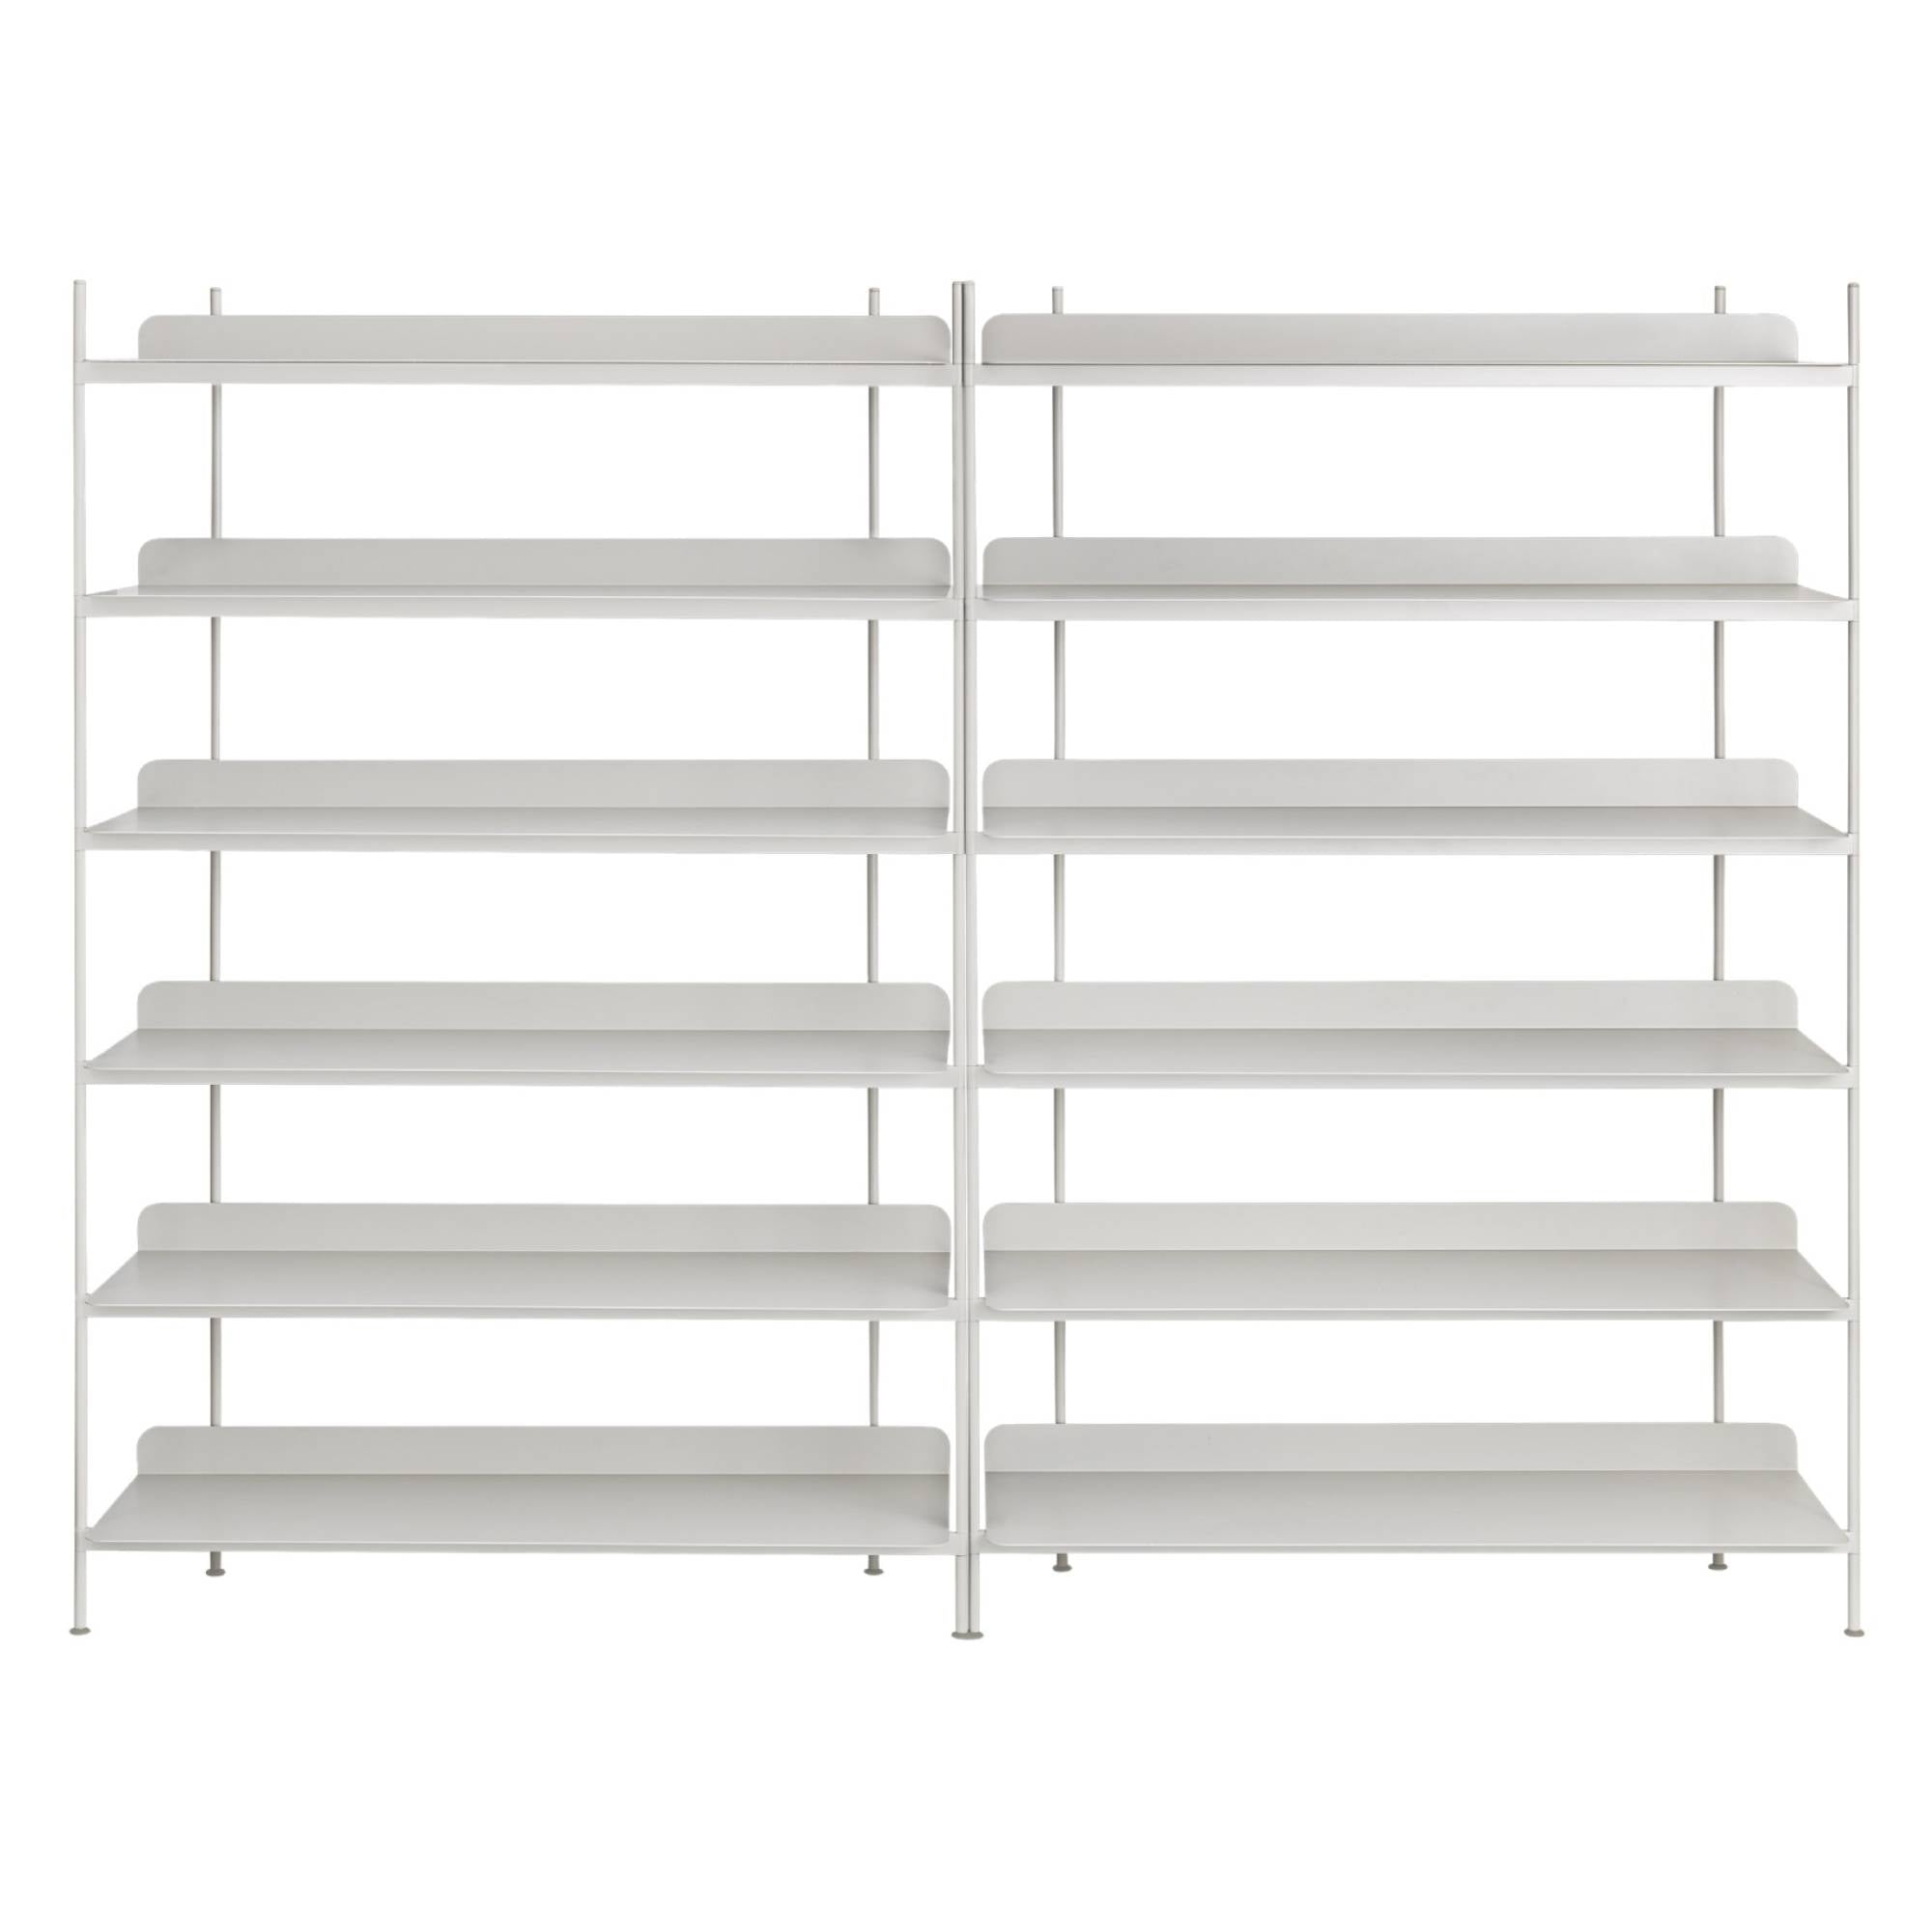 Compile Shelving System: Configuration 8 + Grey